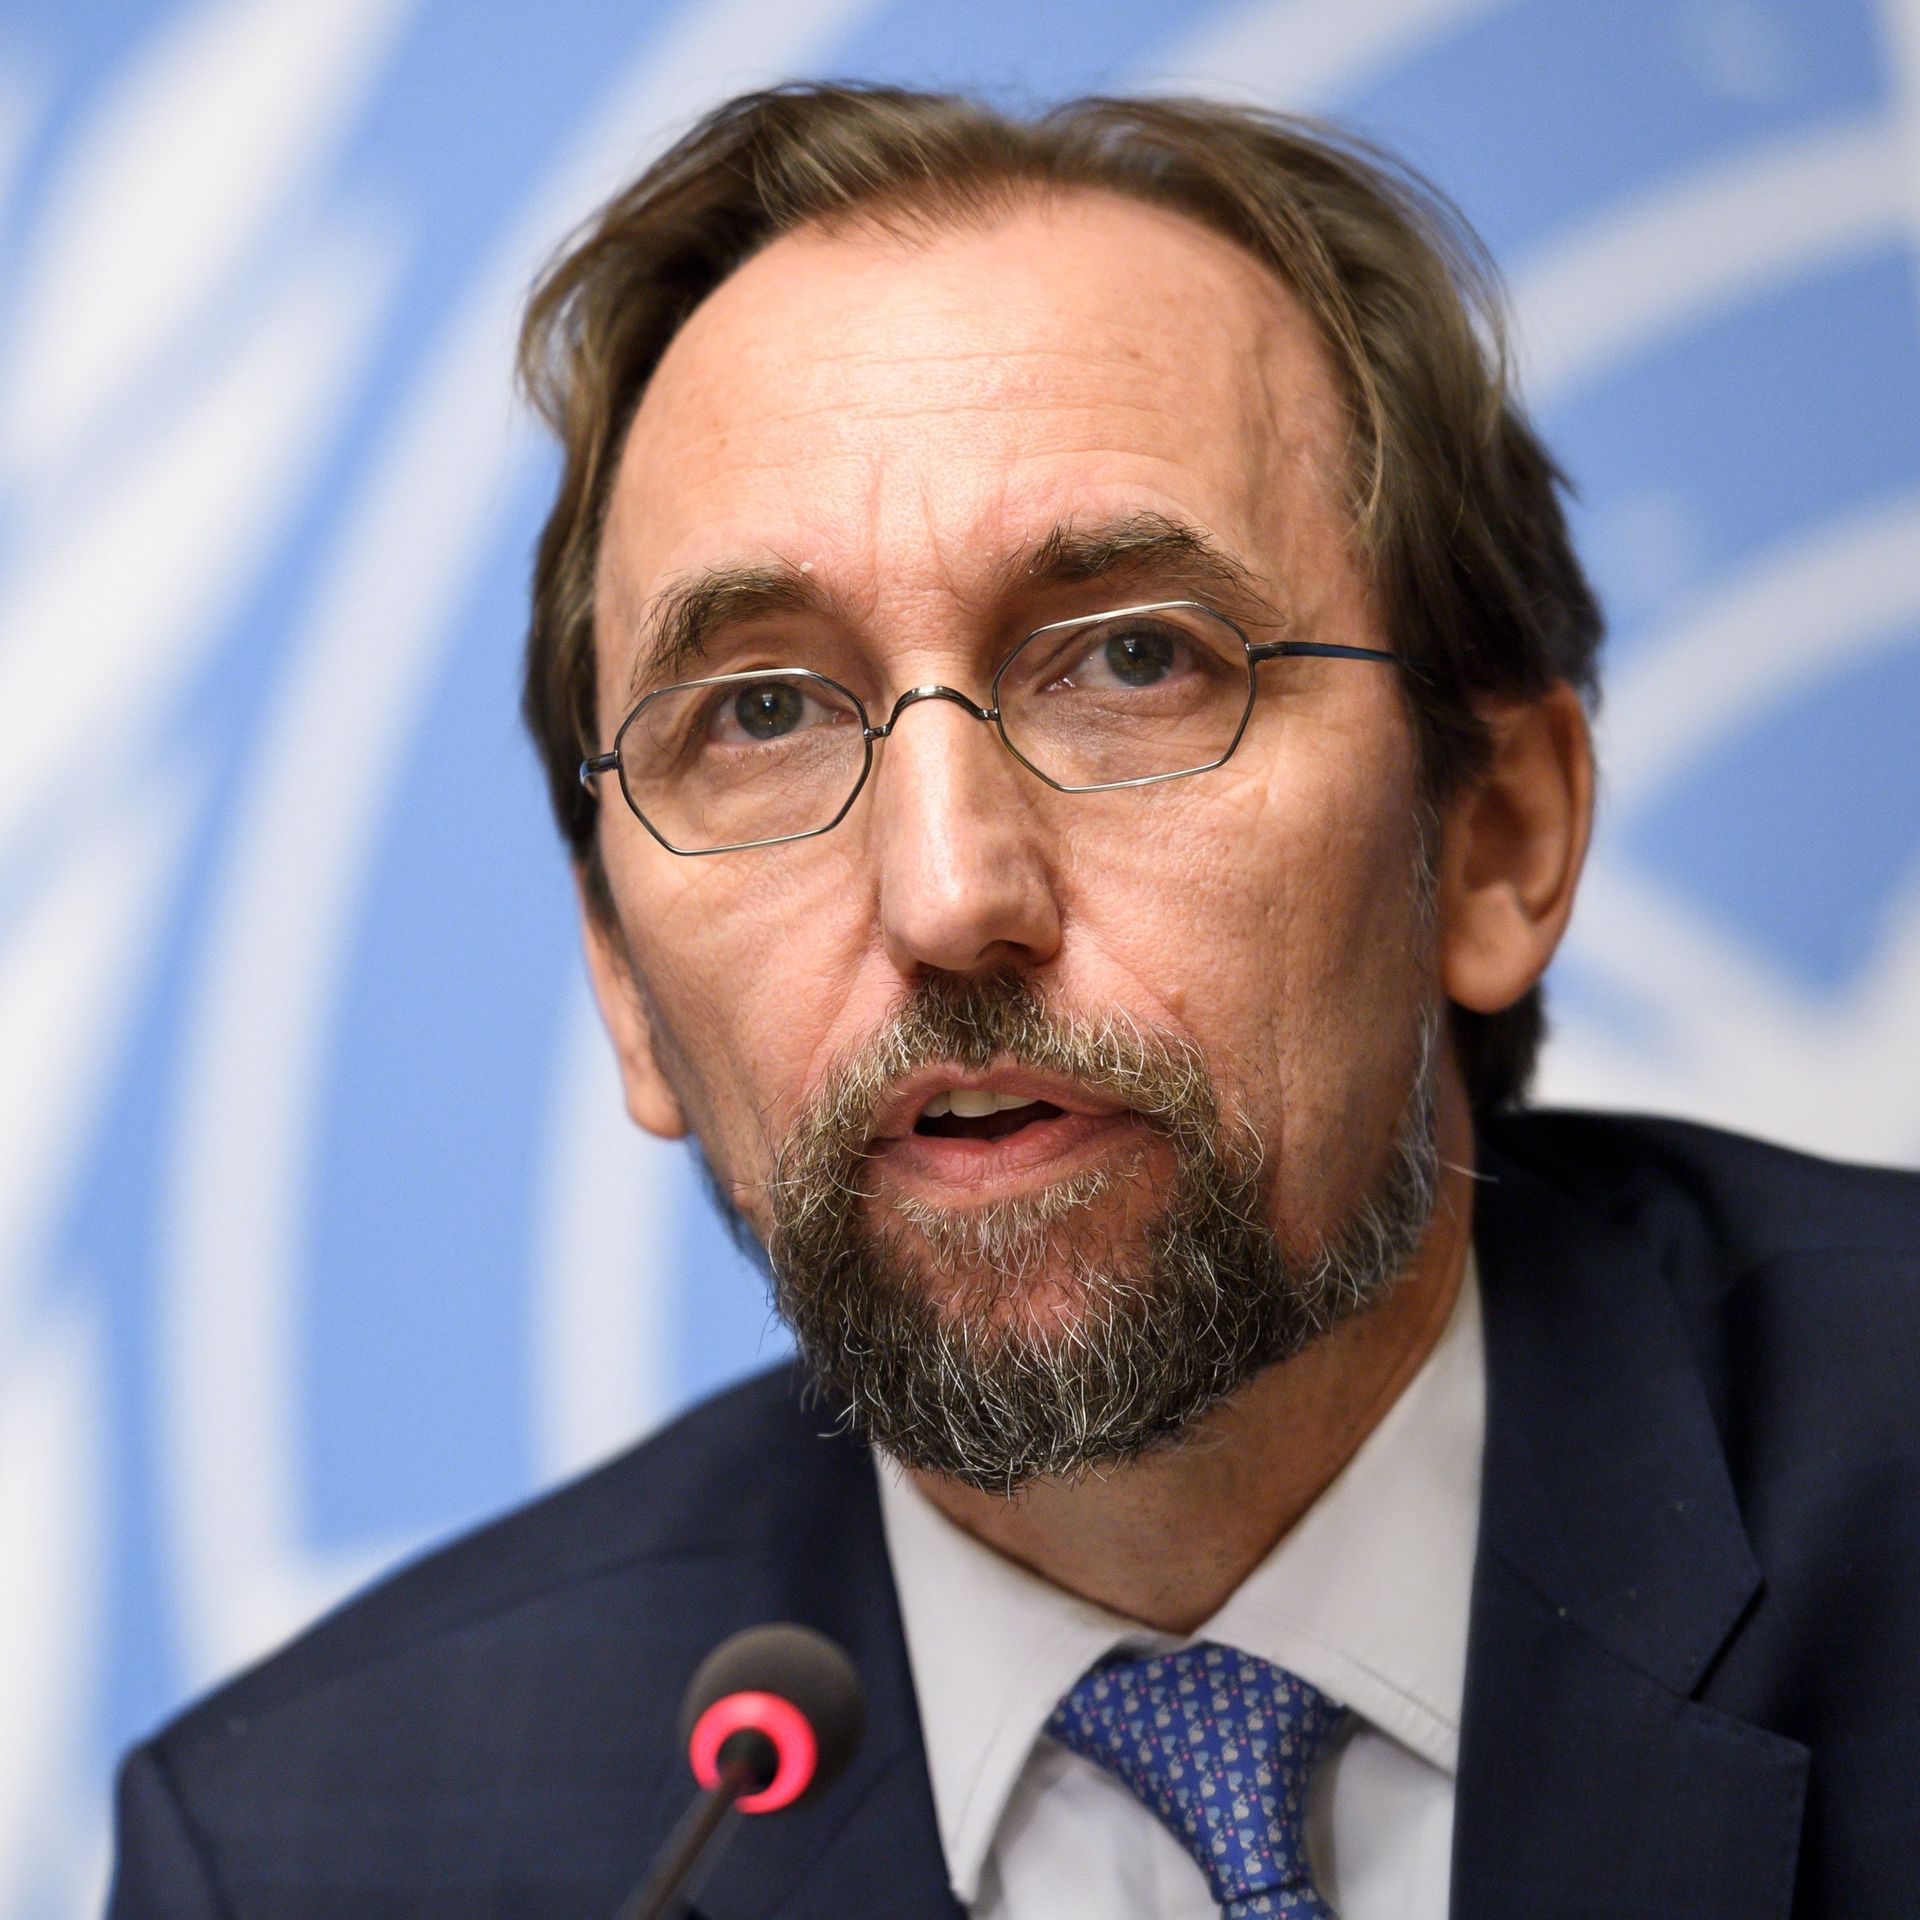 United Nations High Commissioner for Human Rights Zeid Ra'ad Al Hussein speaking during a press conference at the UN Offices in Geneva.